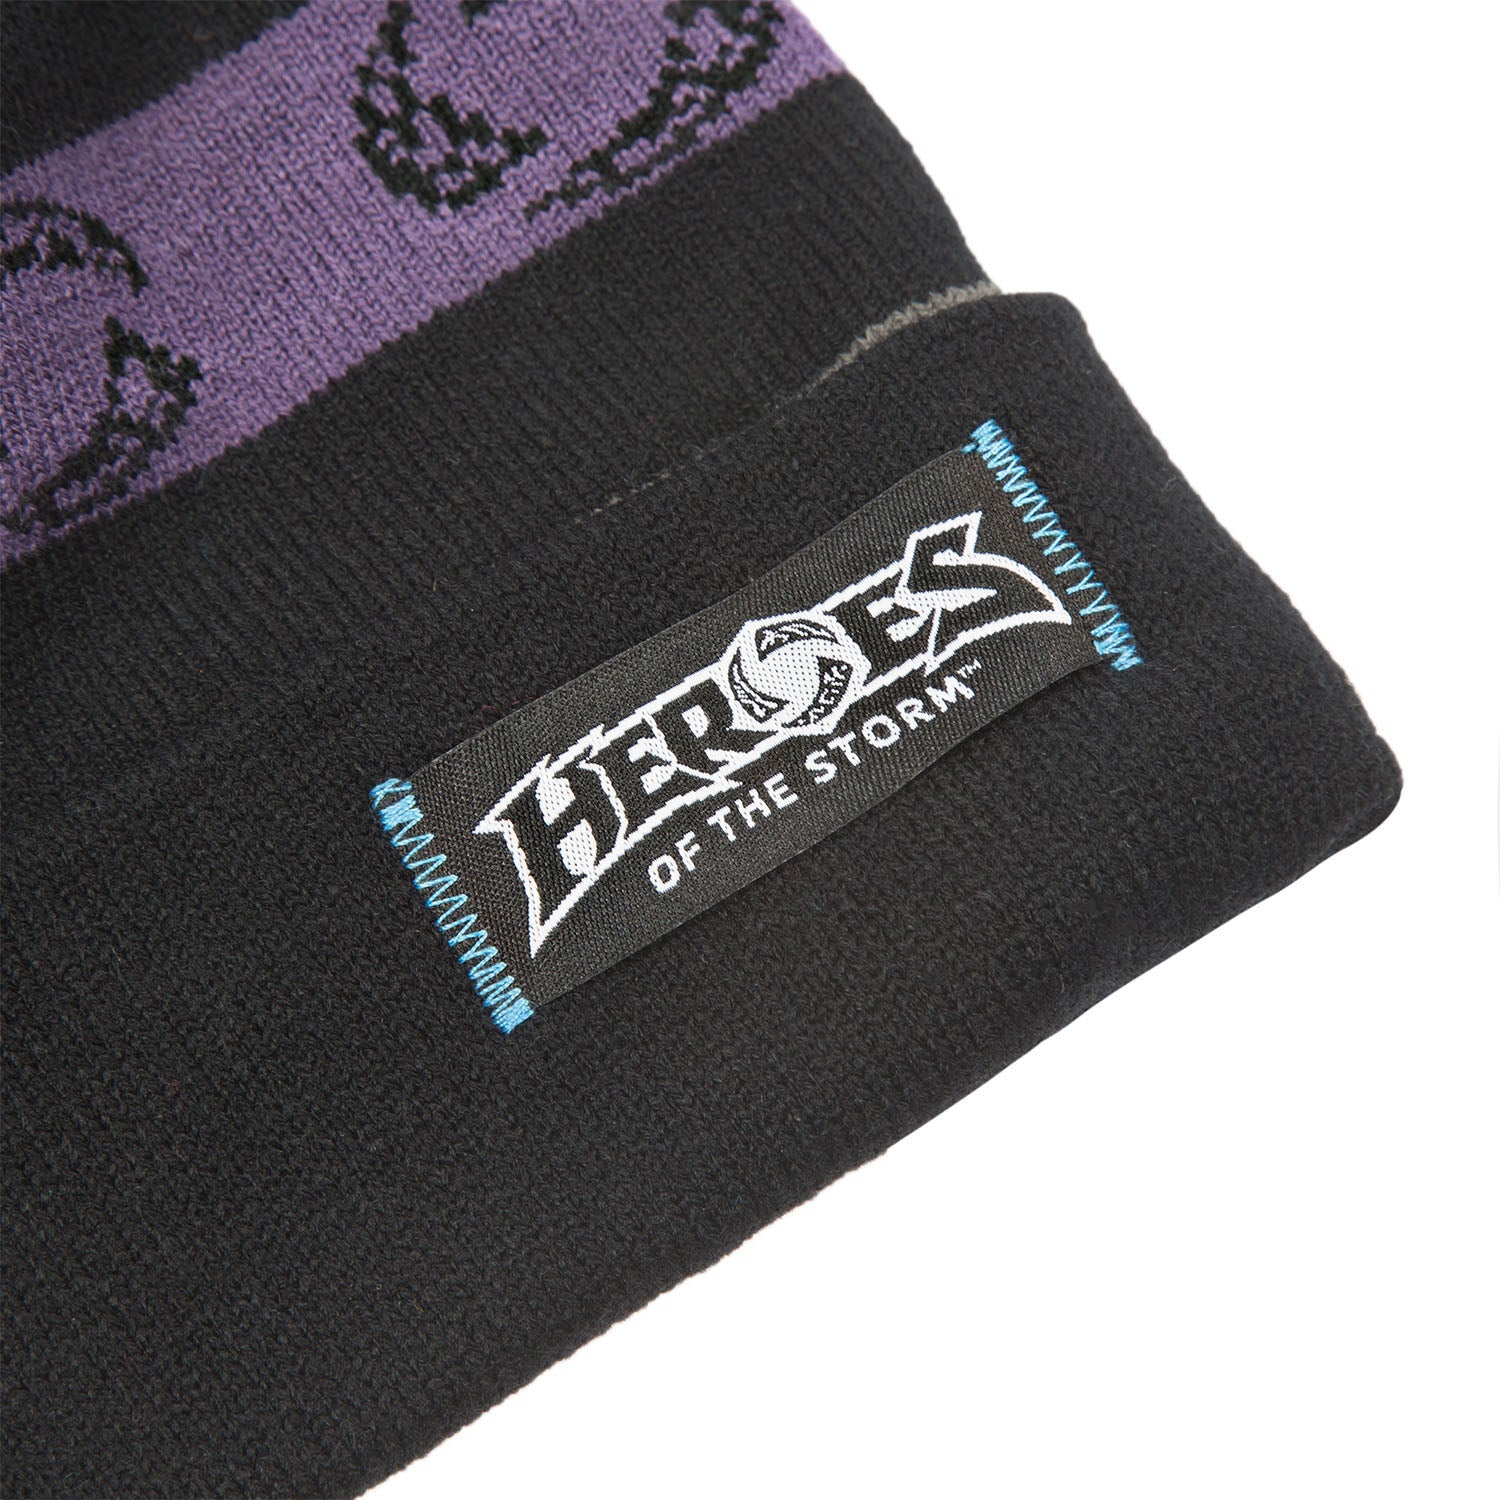 Heroes of the Storm J!NX Winmore Pom Beanie in Black - Zoom Logo View